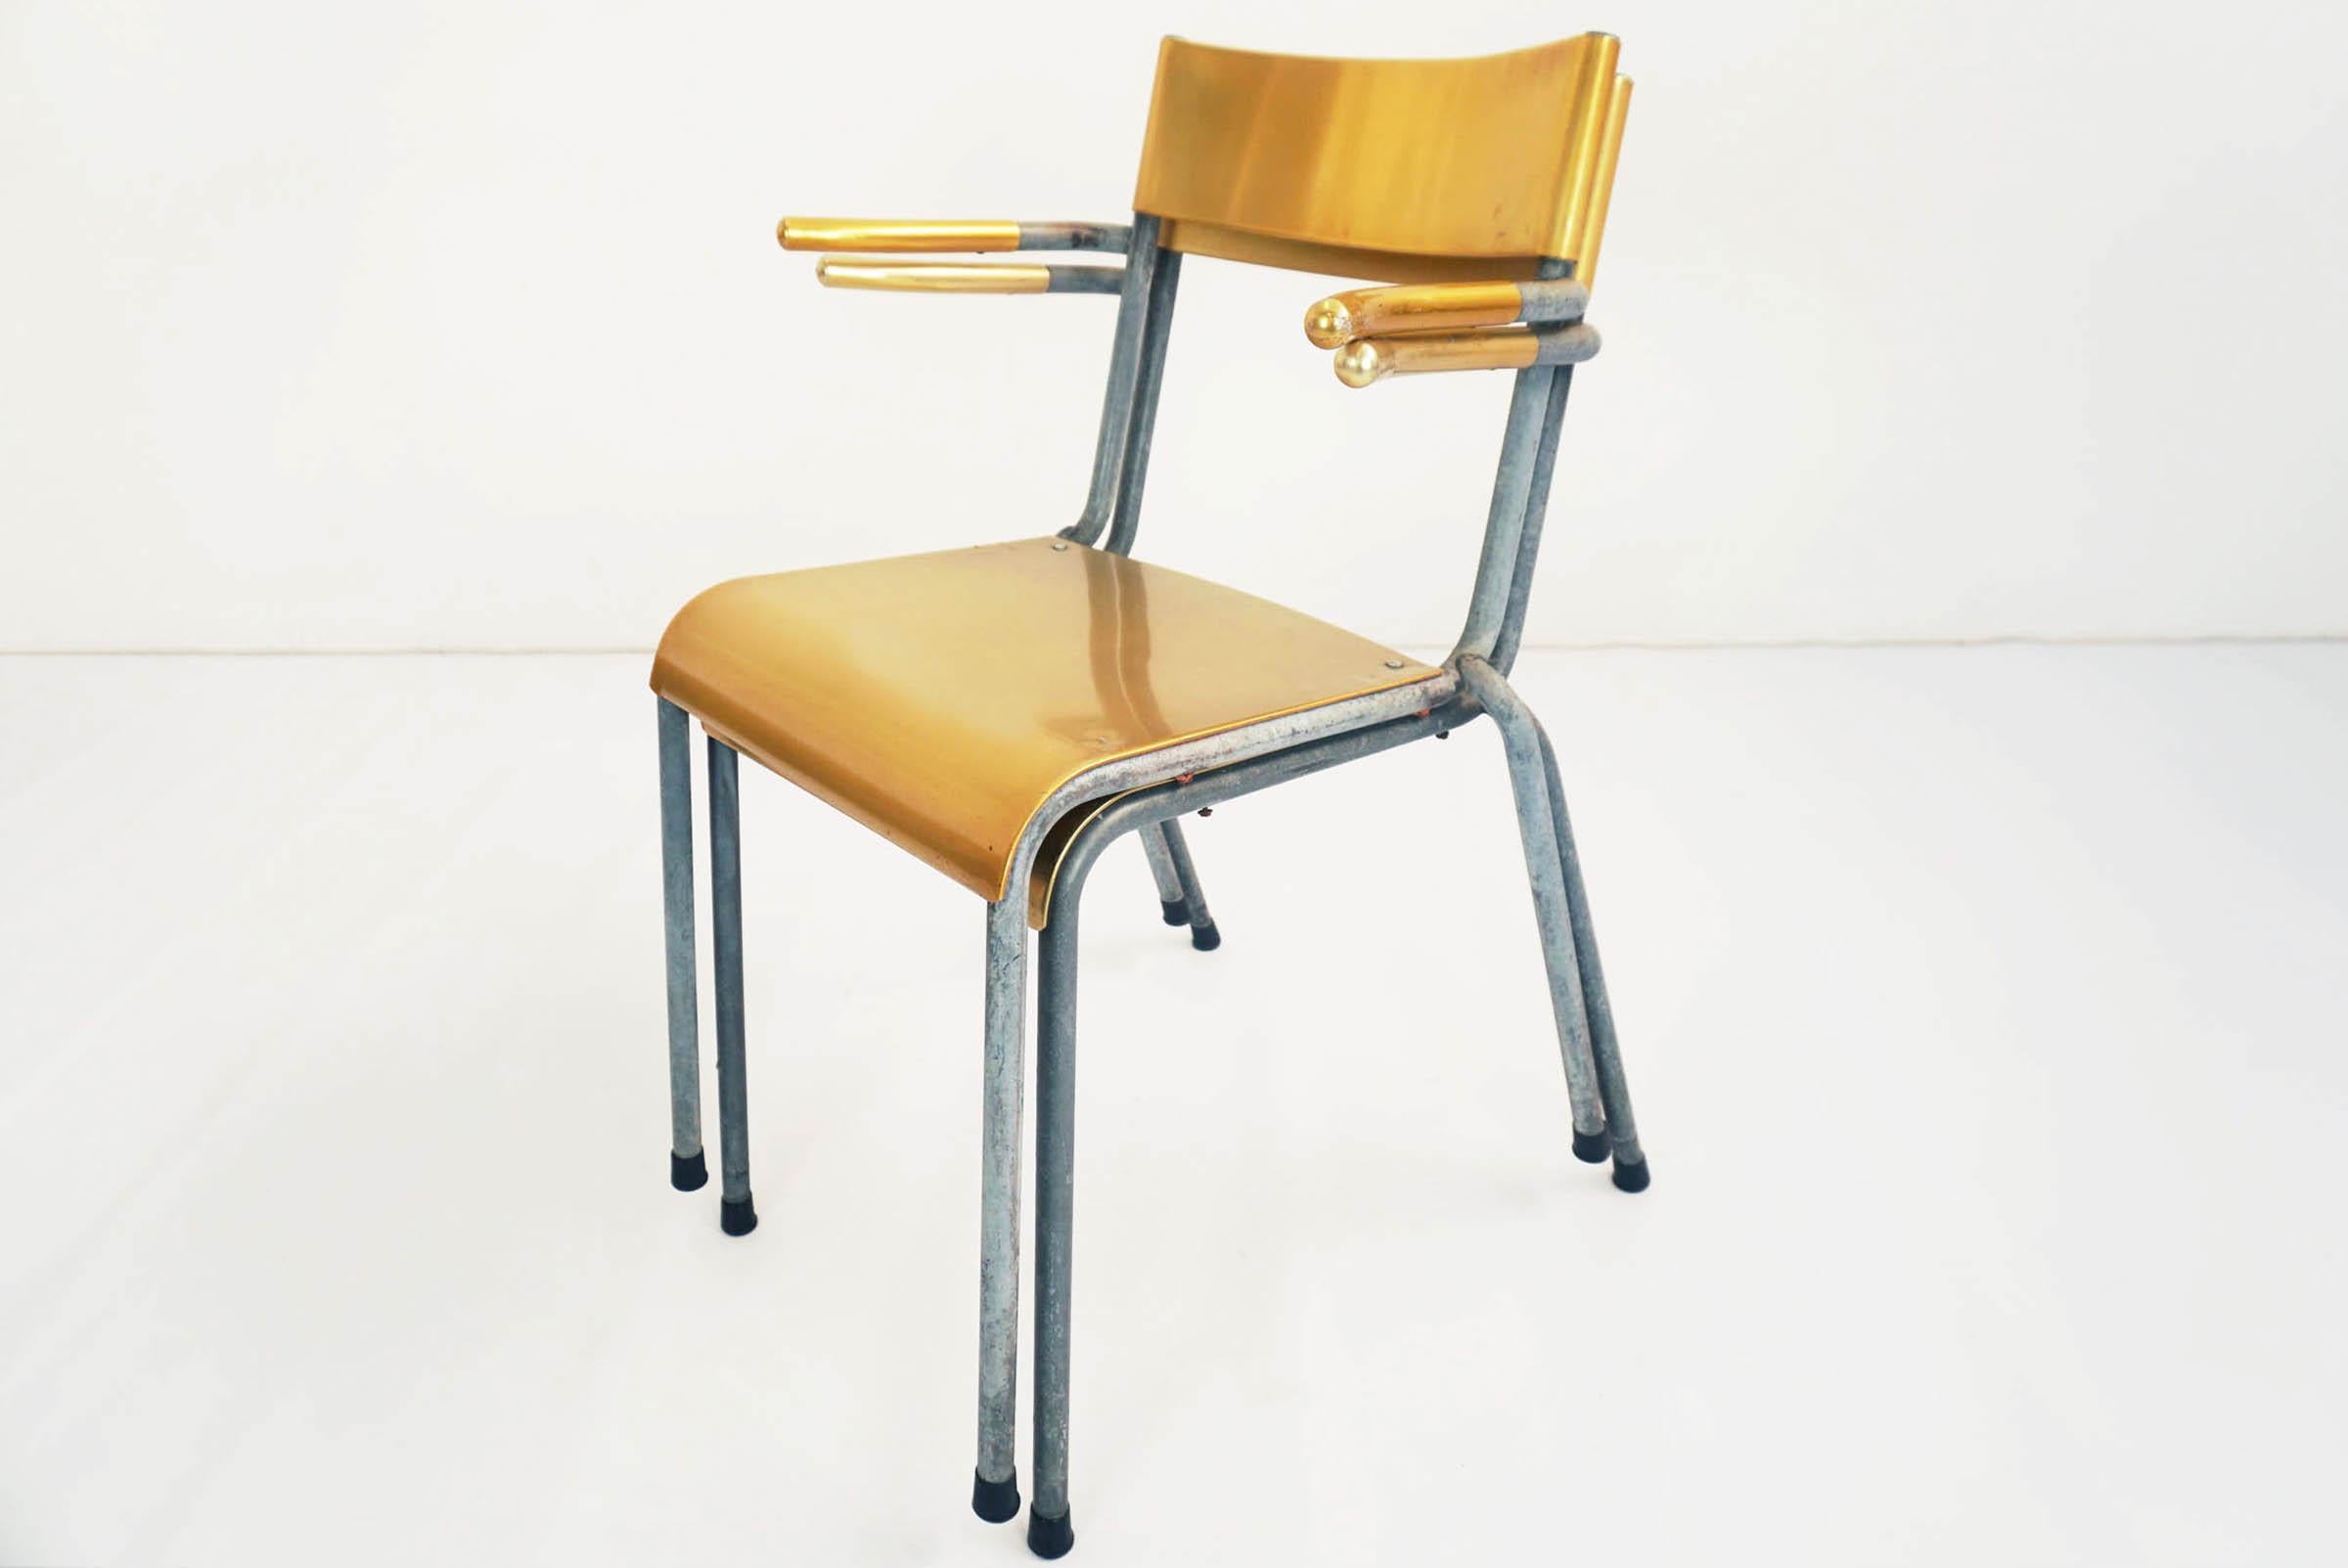 Beautiful yellow aluminum stackable chairs made in Switzerland during the '40s
13 pieces available for indoor or garden.